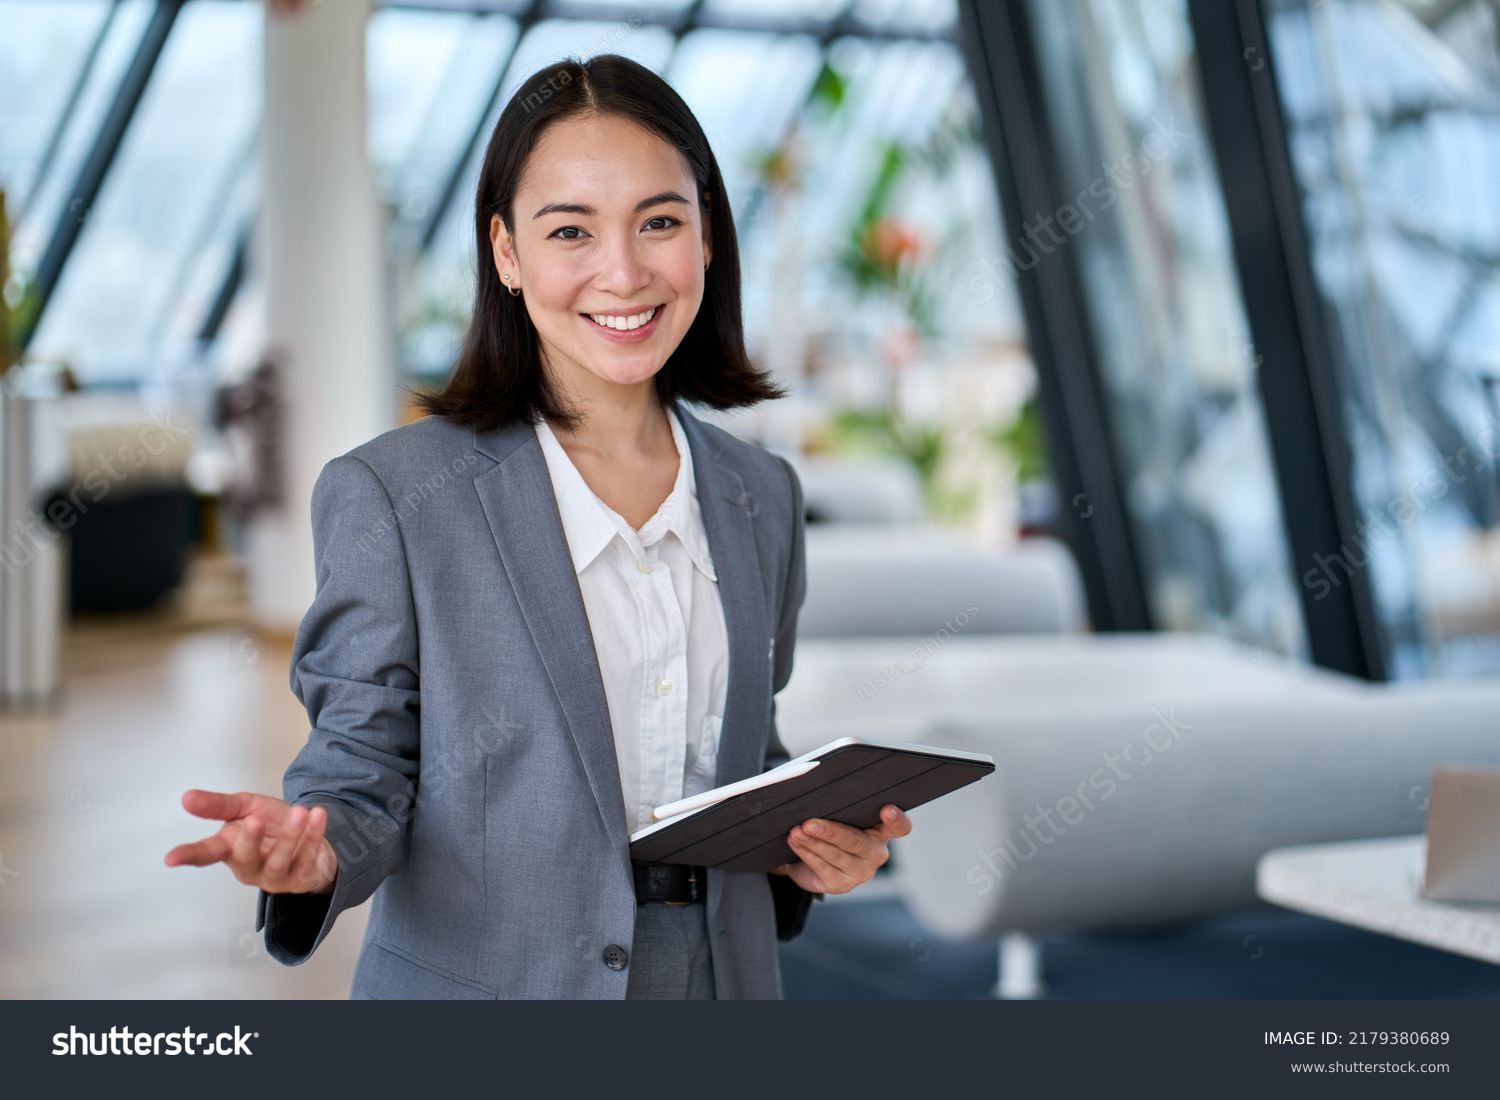 Happy young Asian saleswoman looking at camera welcoming client. Smiling woman executive manager, secretary offering professional business services holding digital tablet standing in office. Portrait #2179380689